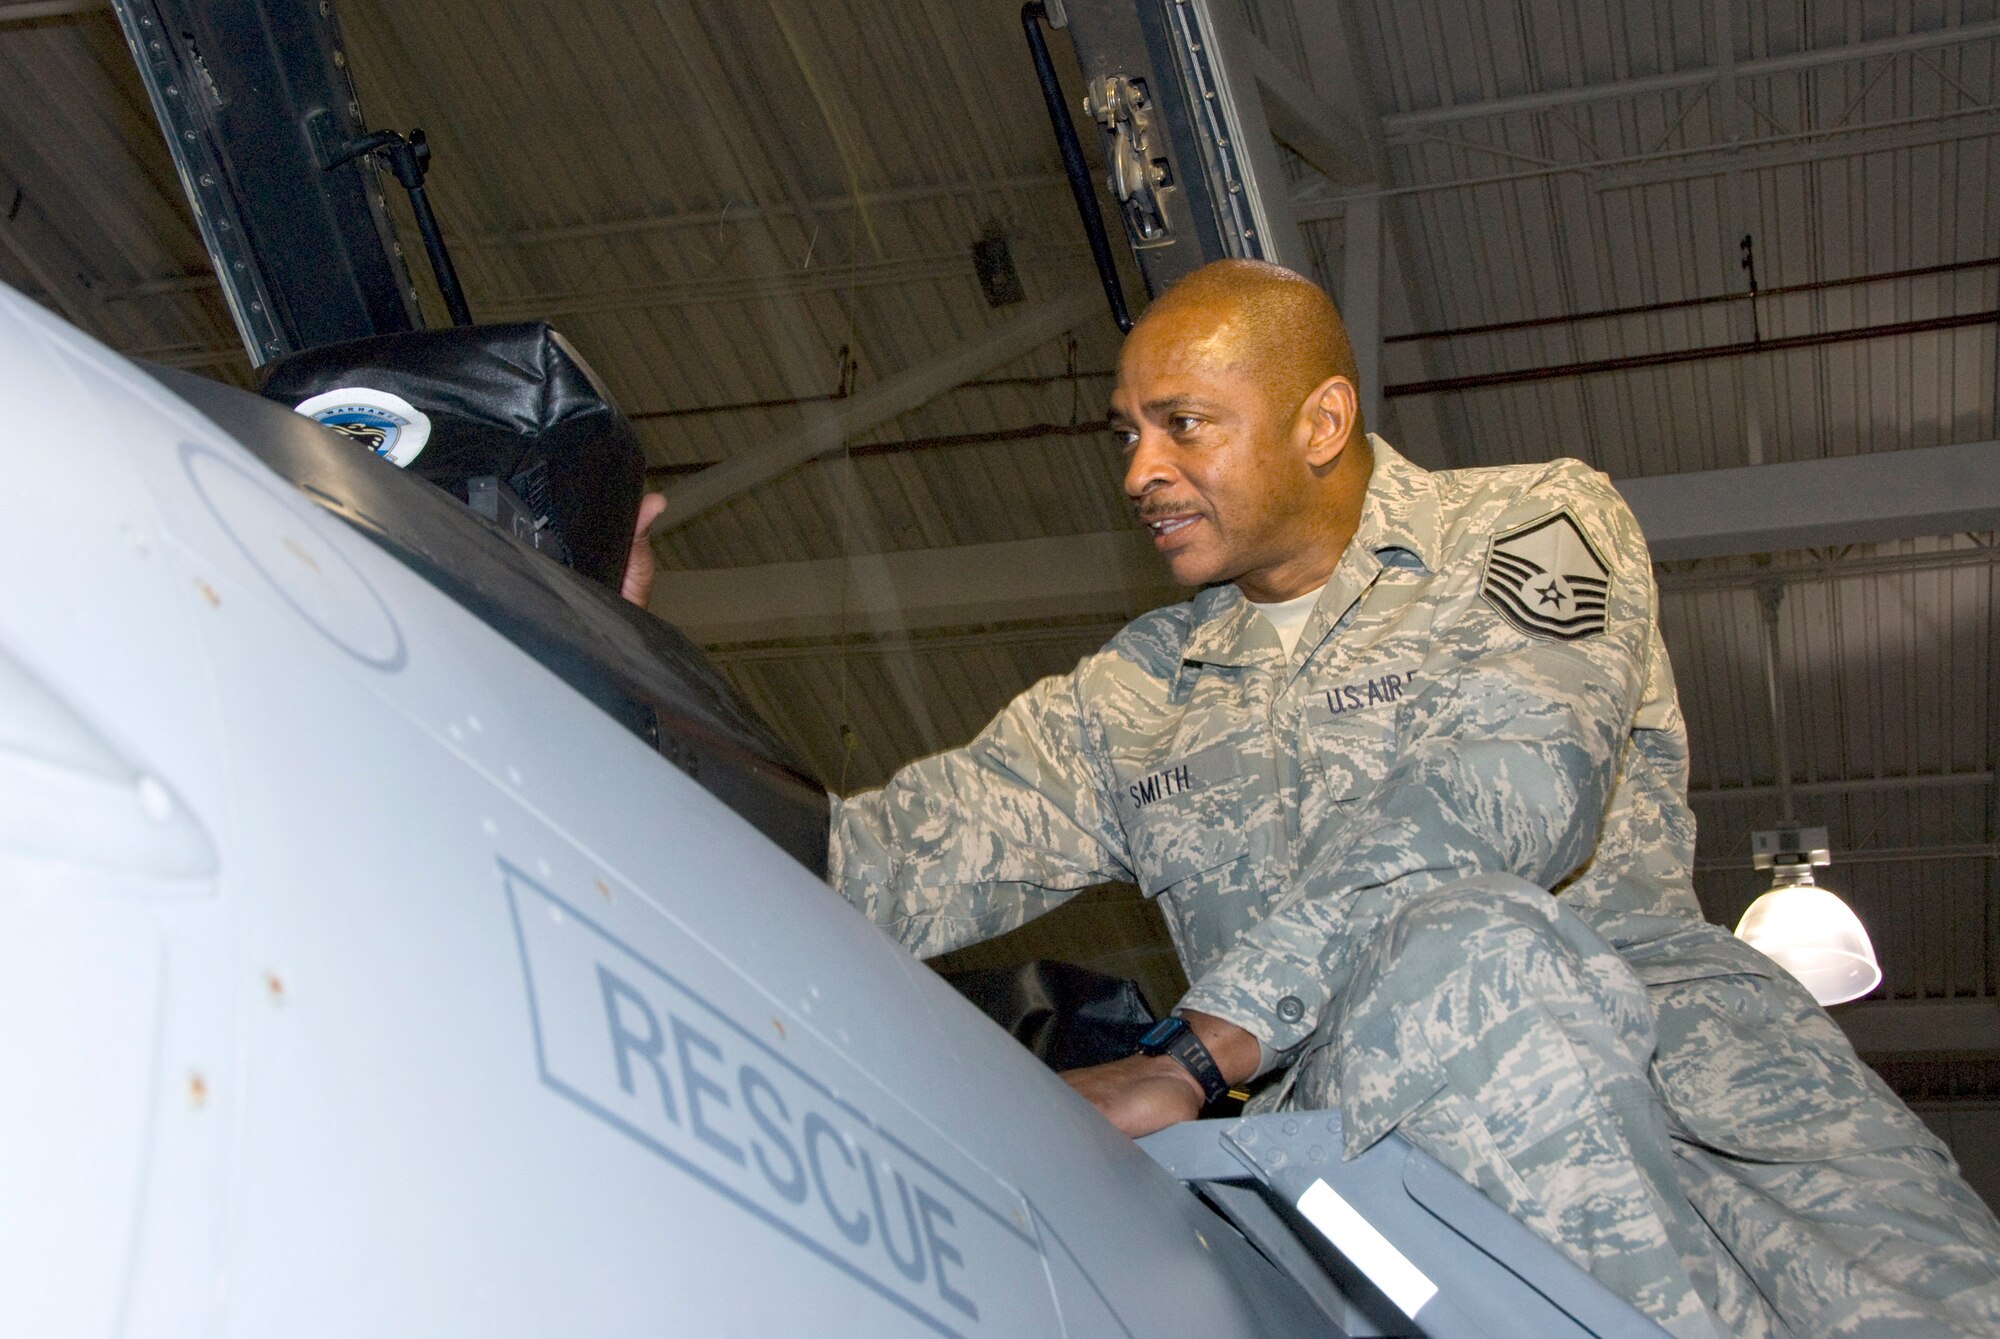 Master Sgt. Peter Smith, a phase maintenance supervisor at the 162nd Fighter Wing, works on an F-16 Fighting Falcon at Tucson International Airport. Smith, who is a highly regarded mentor among his fellow Airmen, learned a great deal about leadership as a college football player under famed Alabama coach Paul “Bear” Bryant. (U.S. Air Force photo/Master Sgt. Dave Neve)